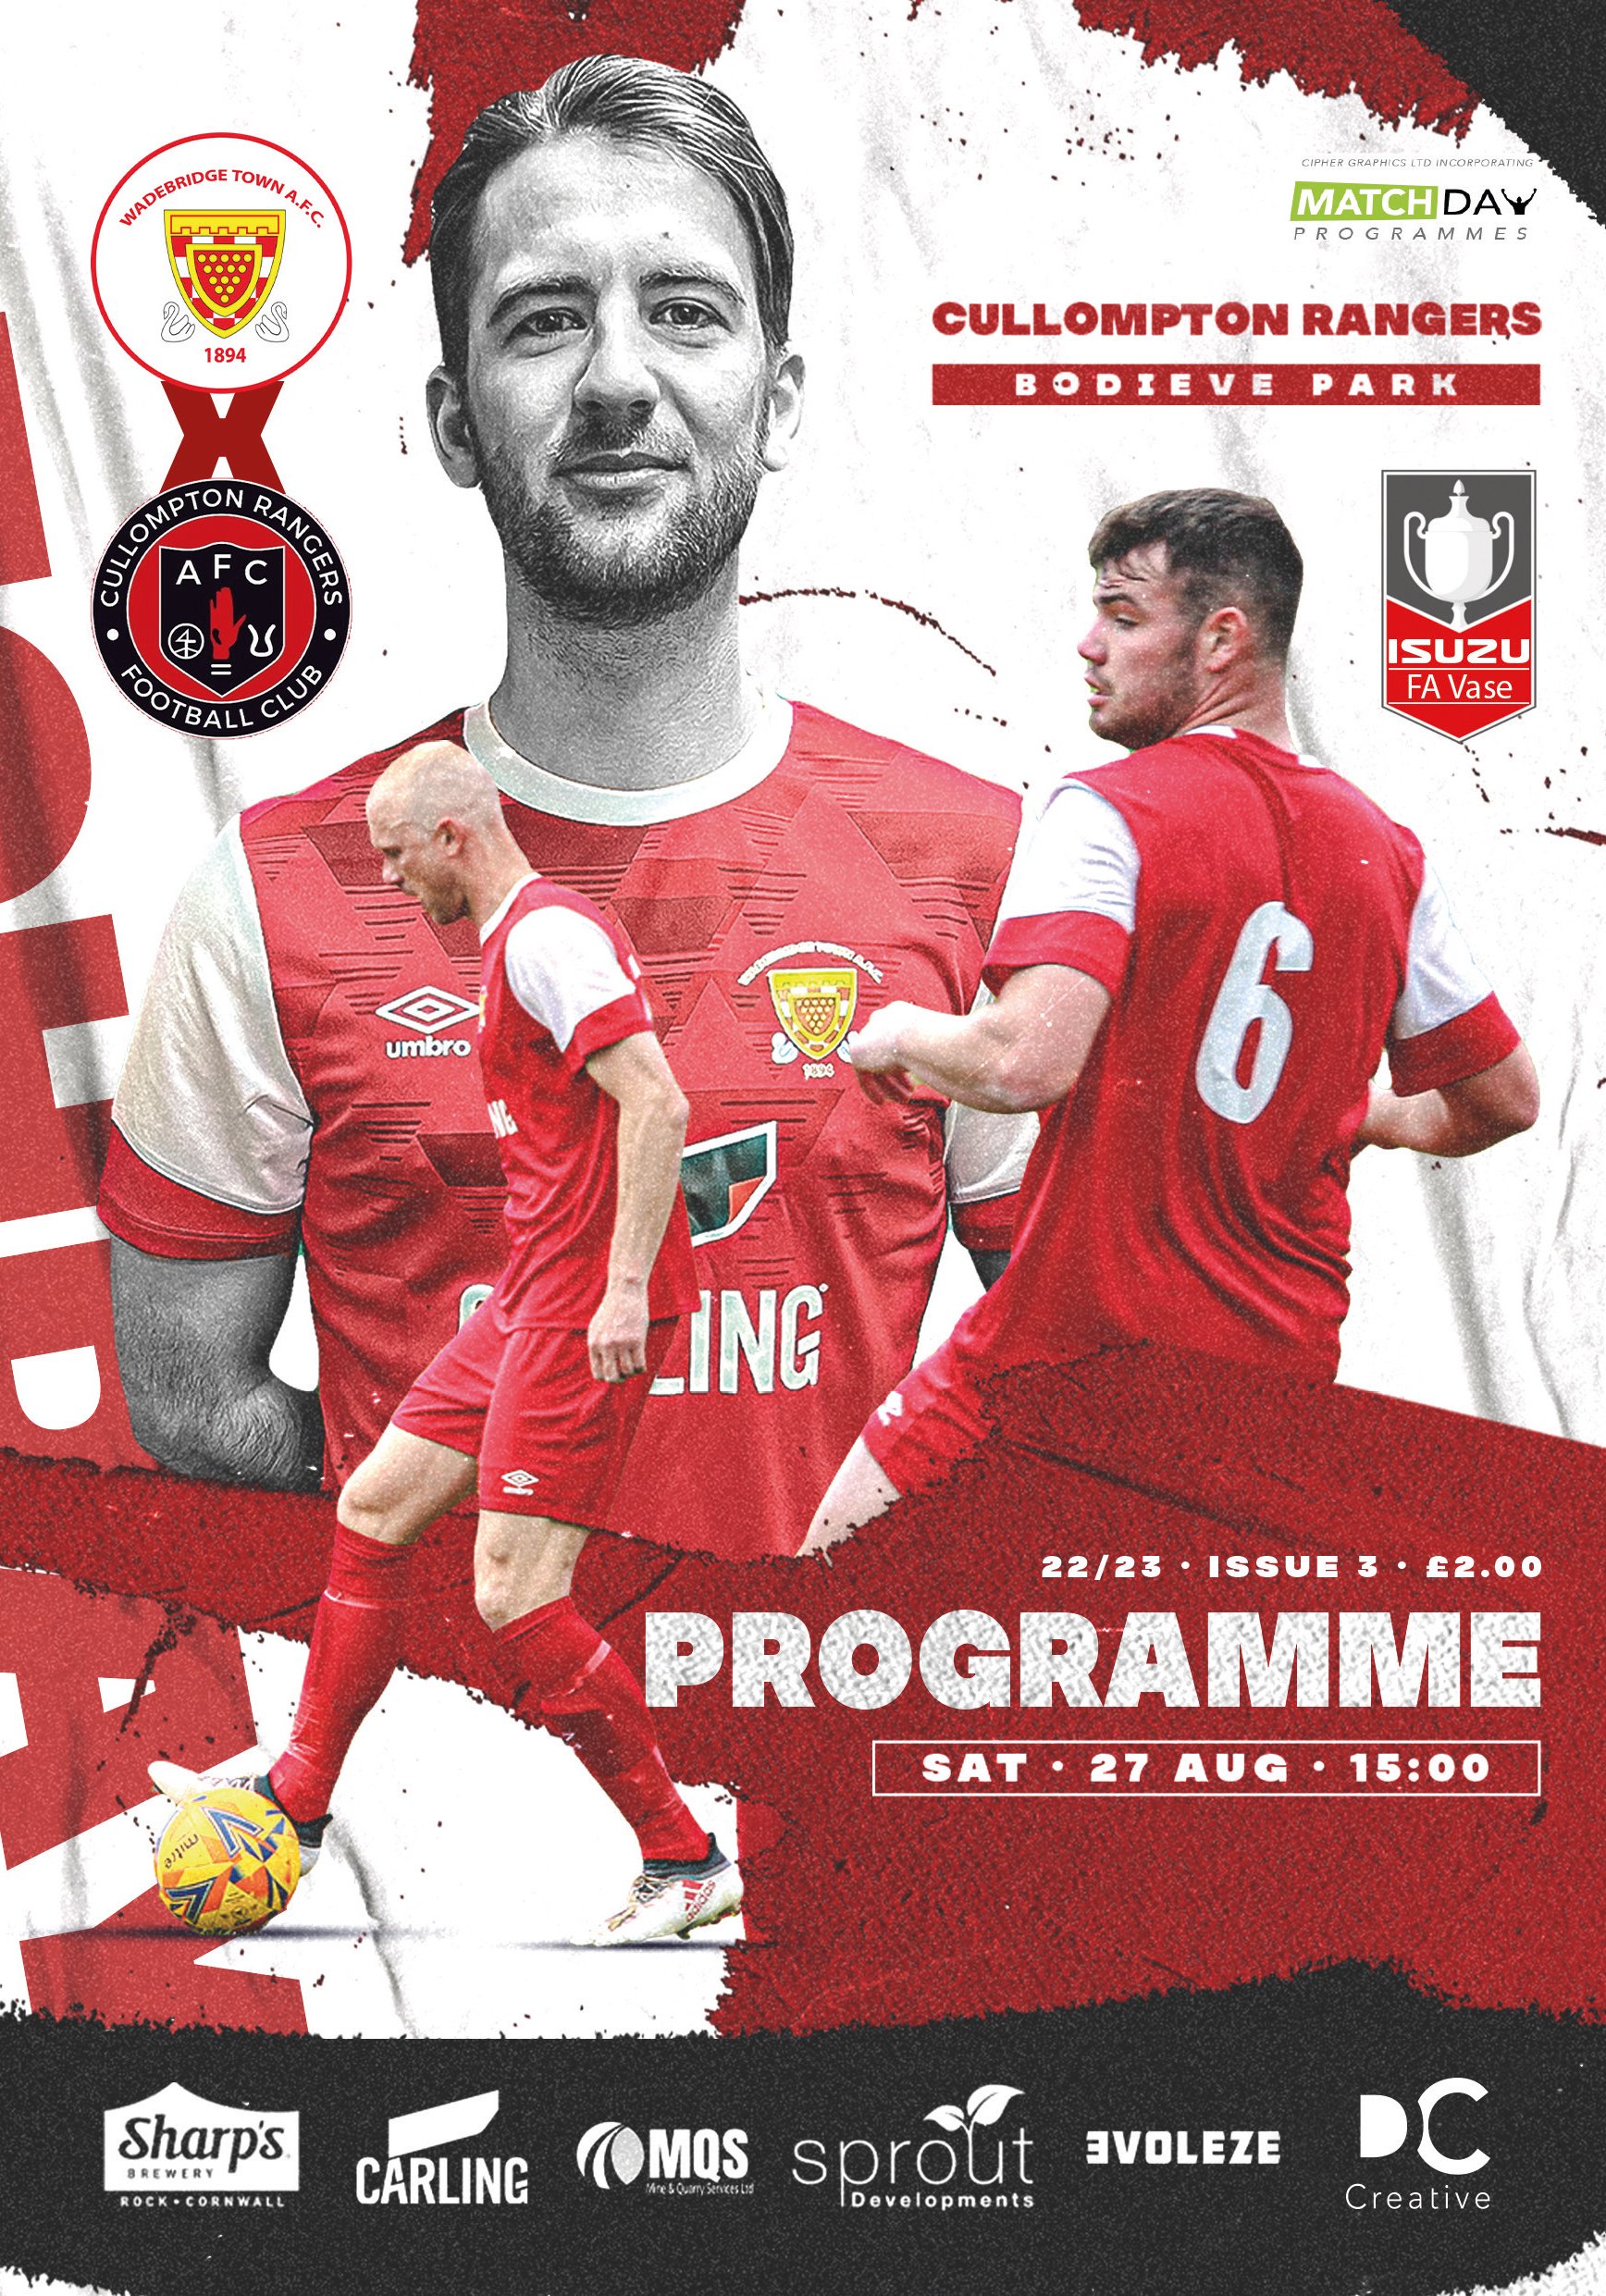 Matchday Programme: Cullompton home in Vase